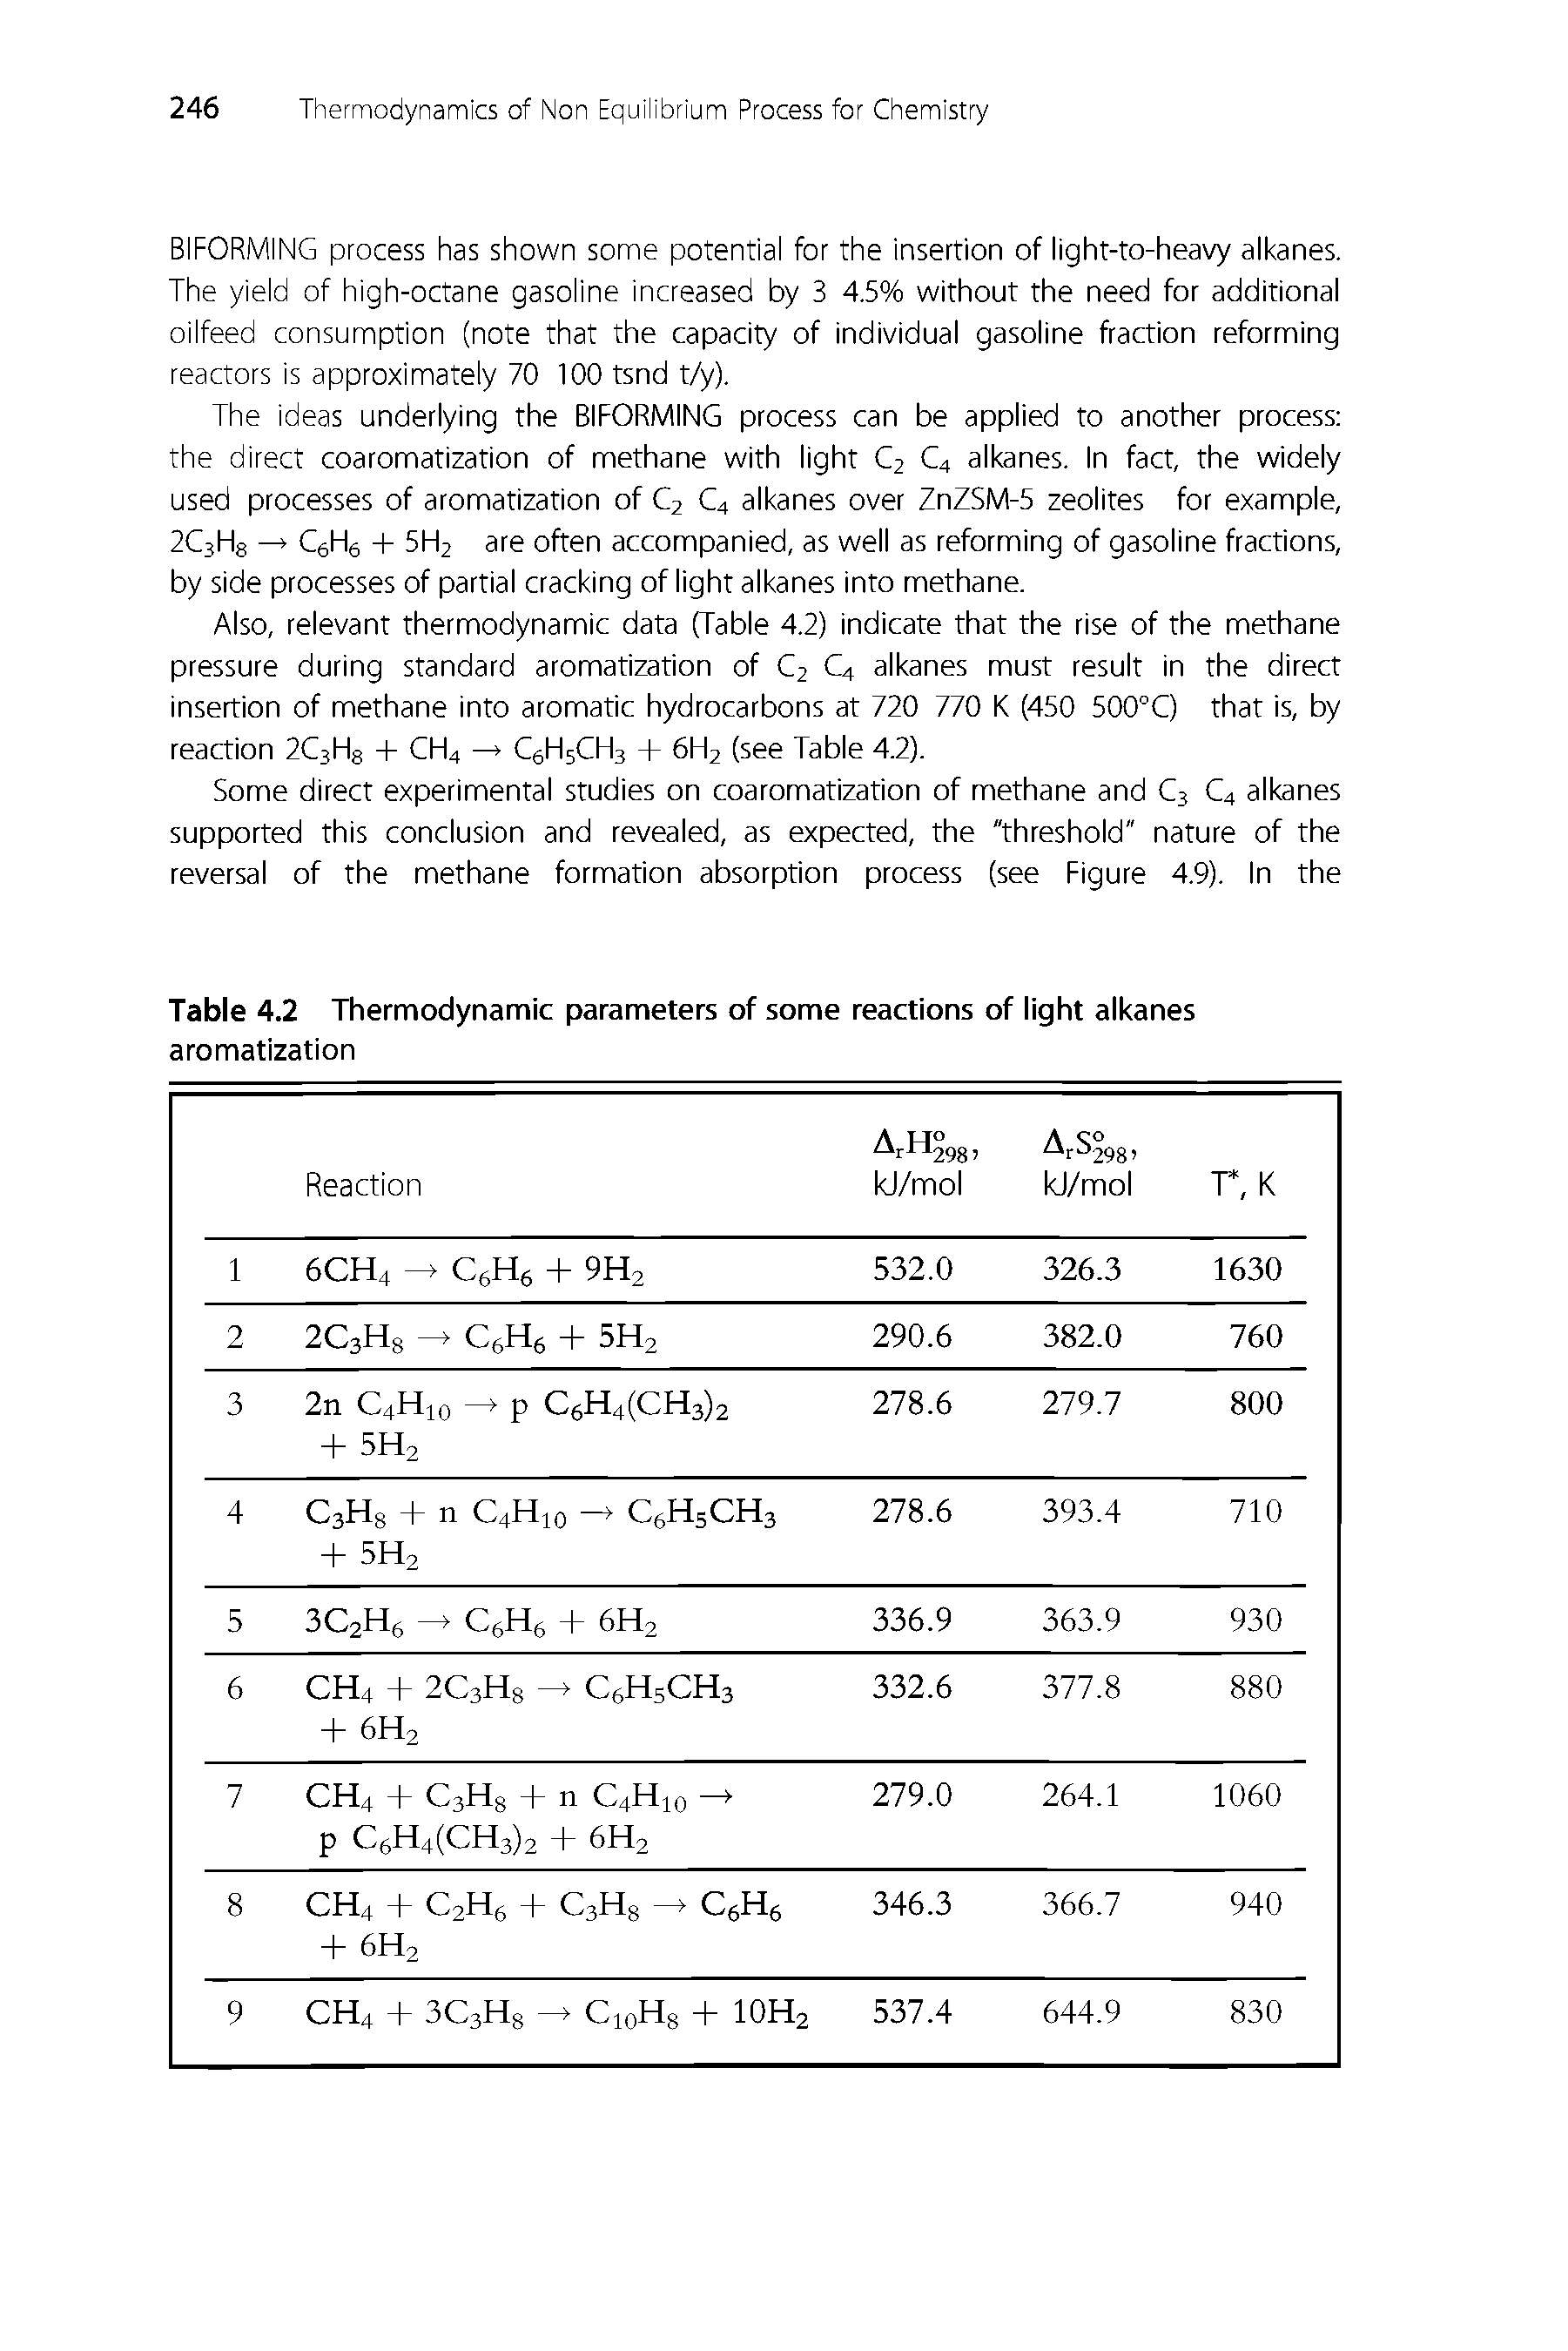 Table 4.2 Thermodynamic parameters of some reactions of light alkanes aromatization...